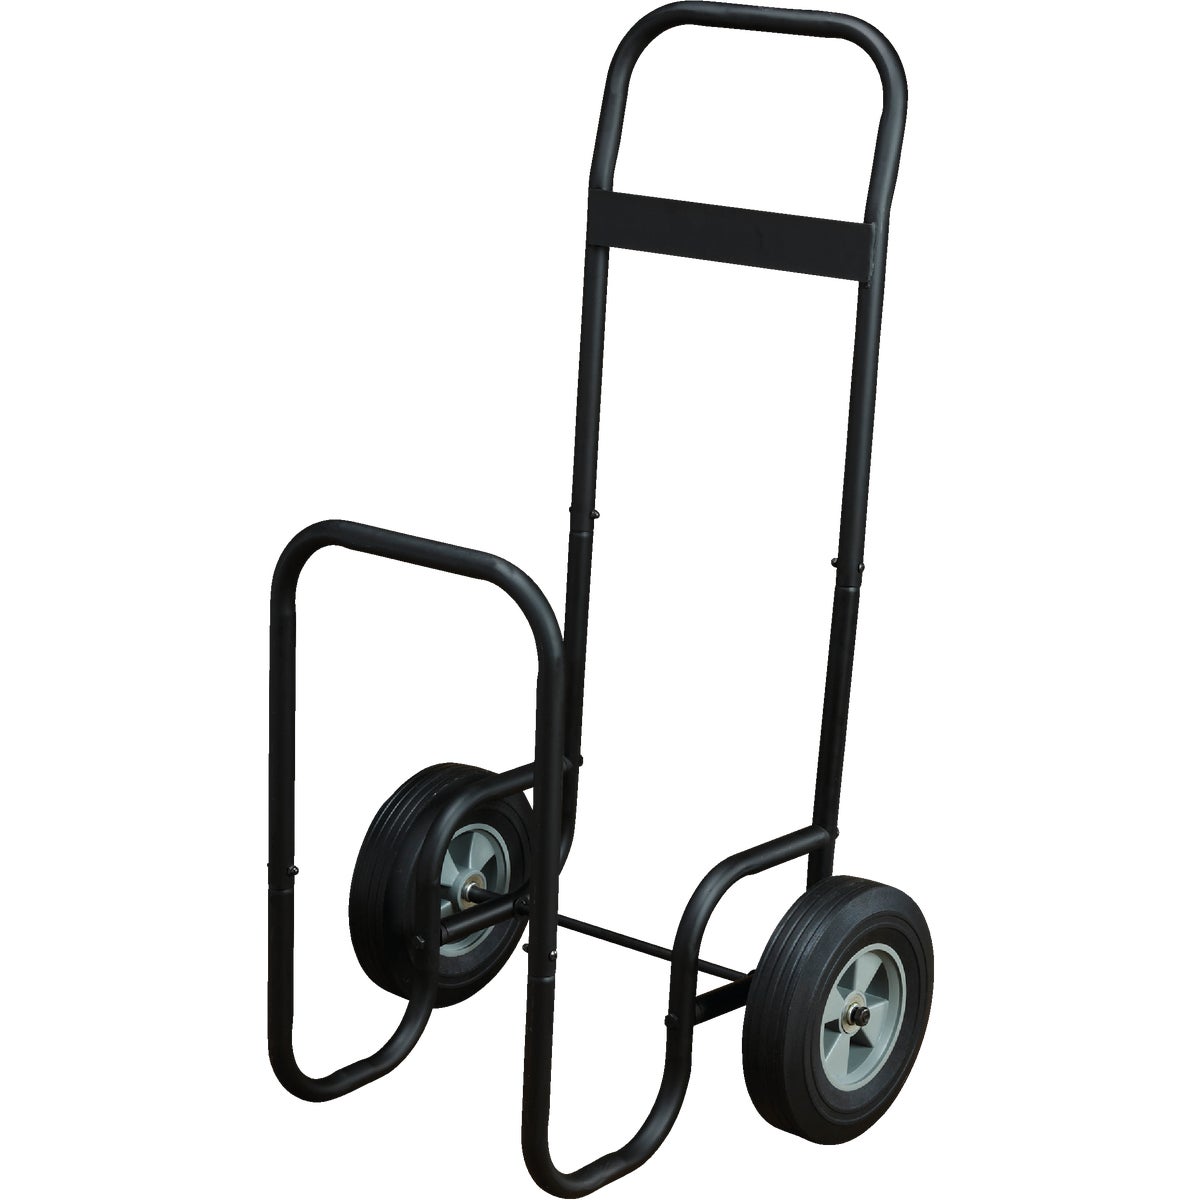 Item 401922, Strong metal design and flat free tires allow for easy transport of logs, 